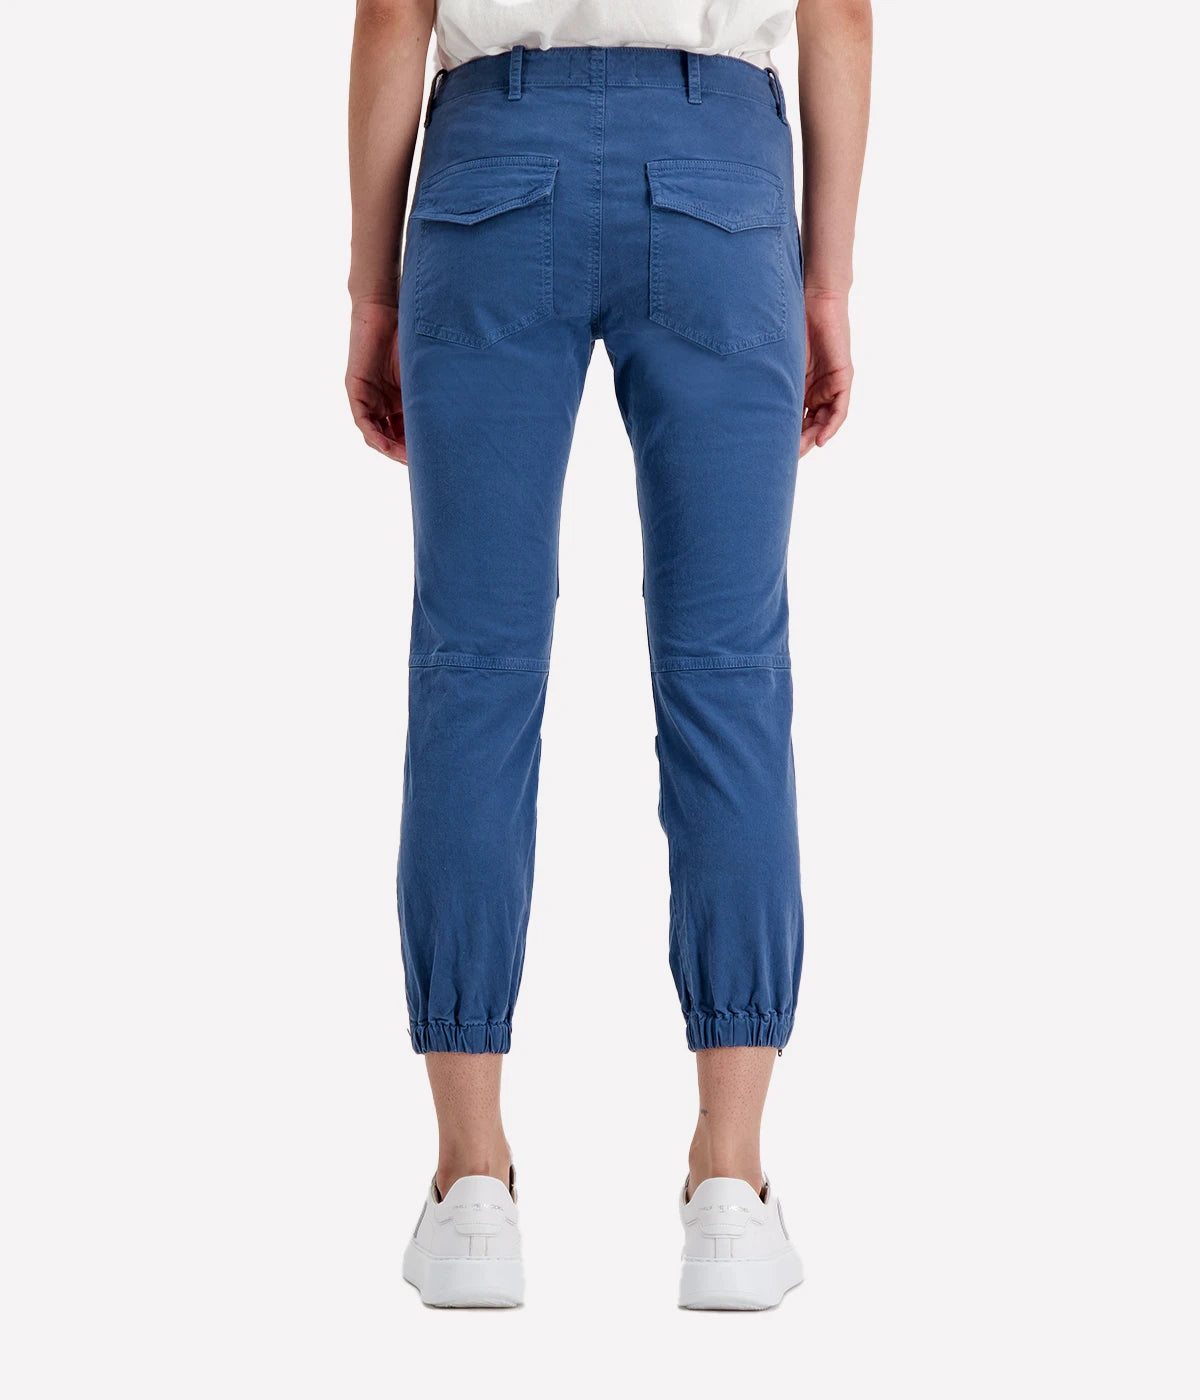 Cropped Military Pant in Cadet Blue